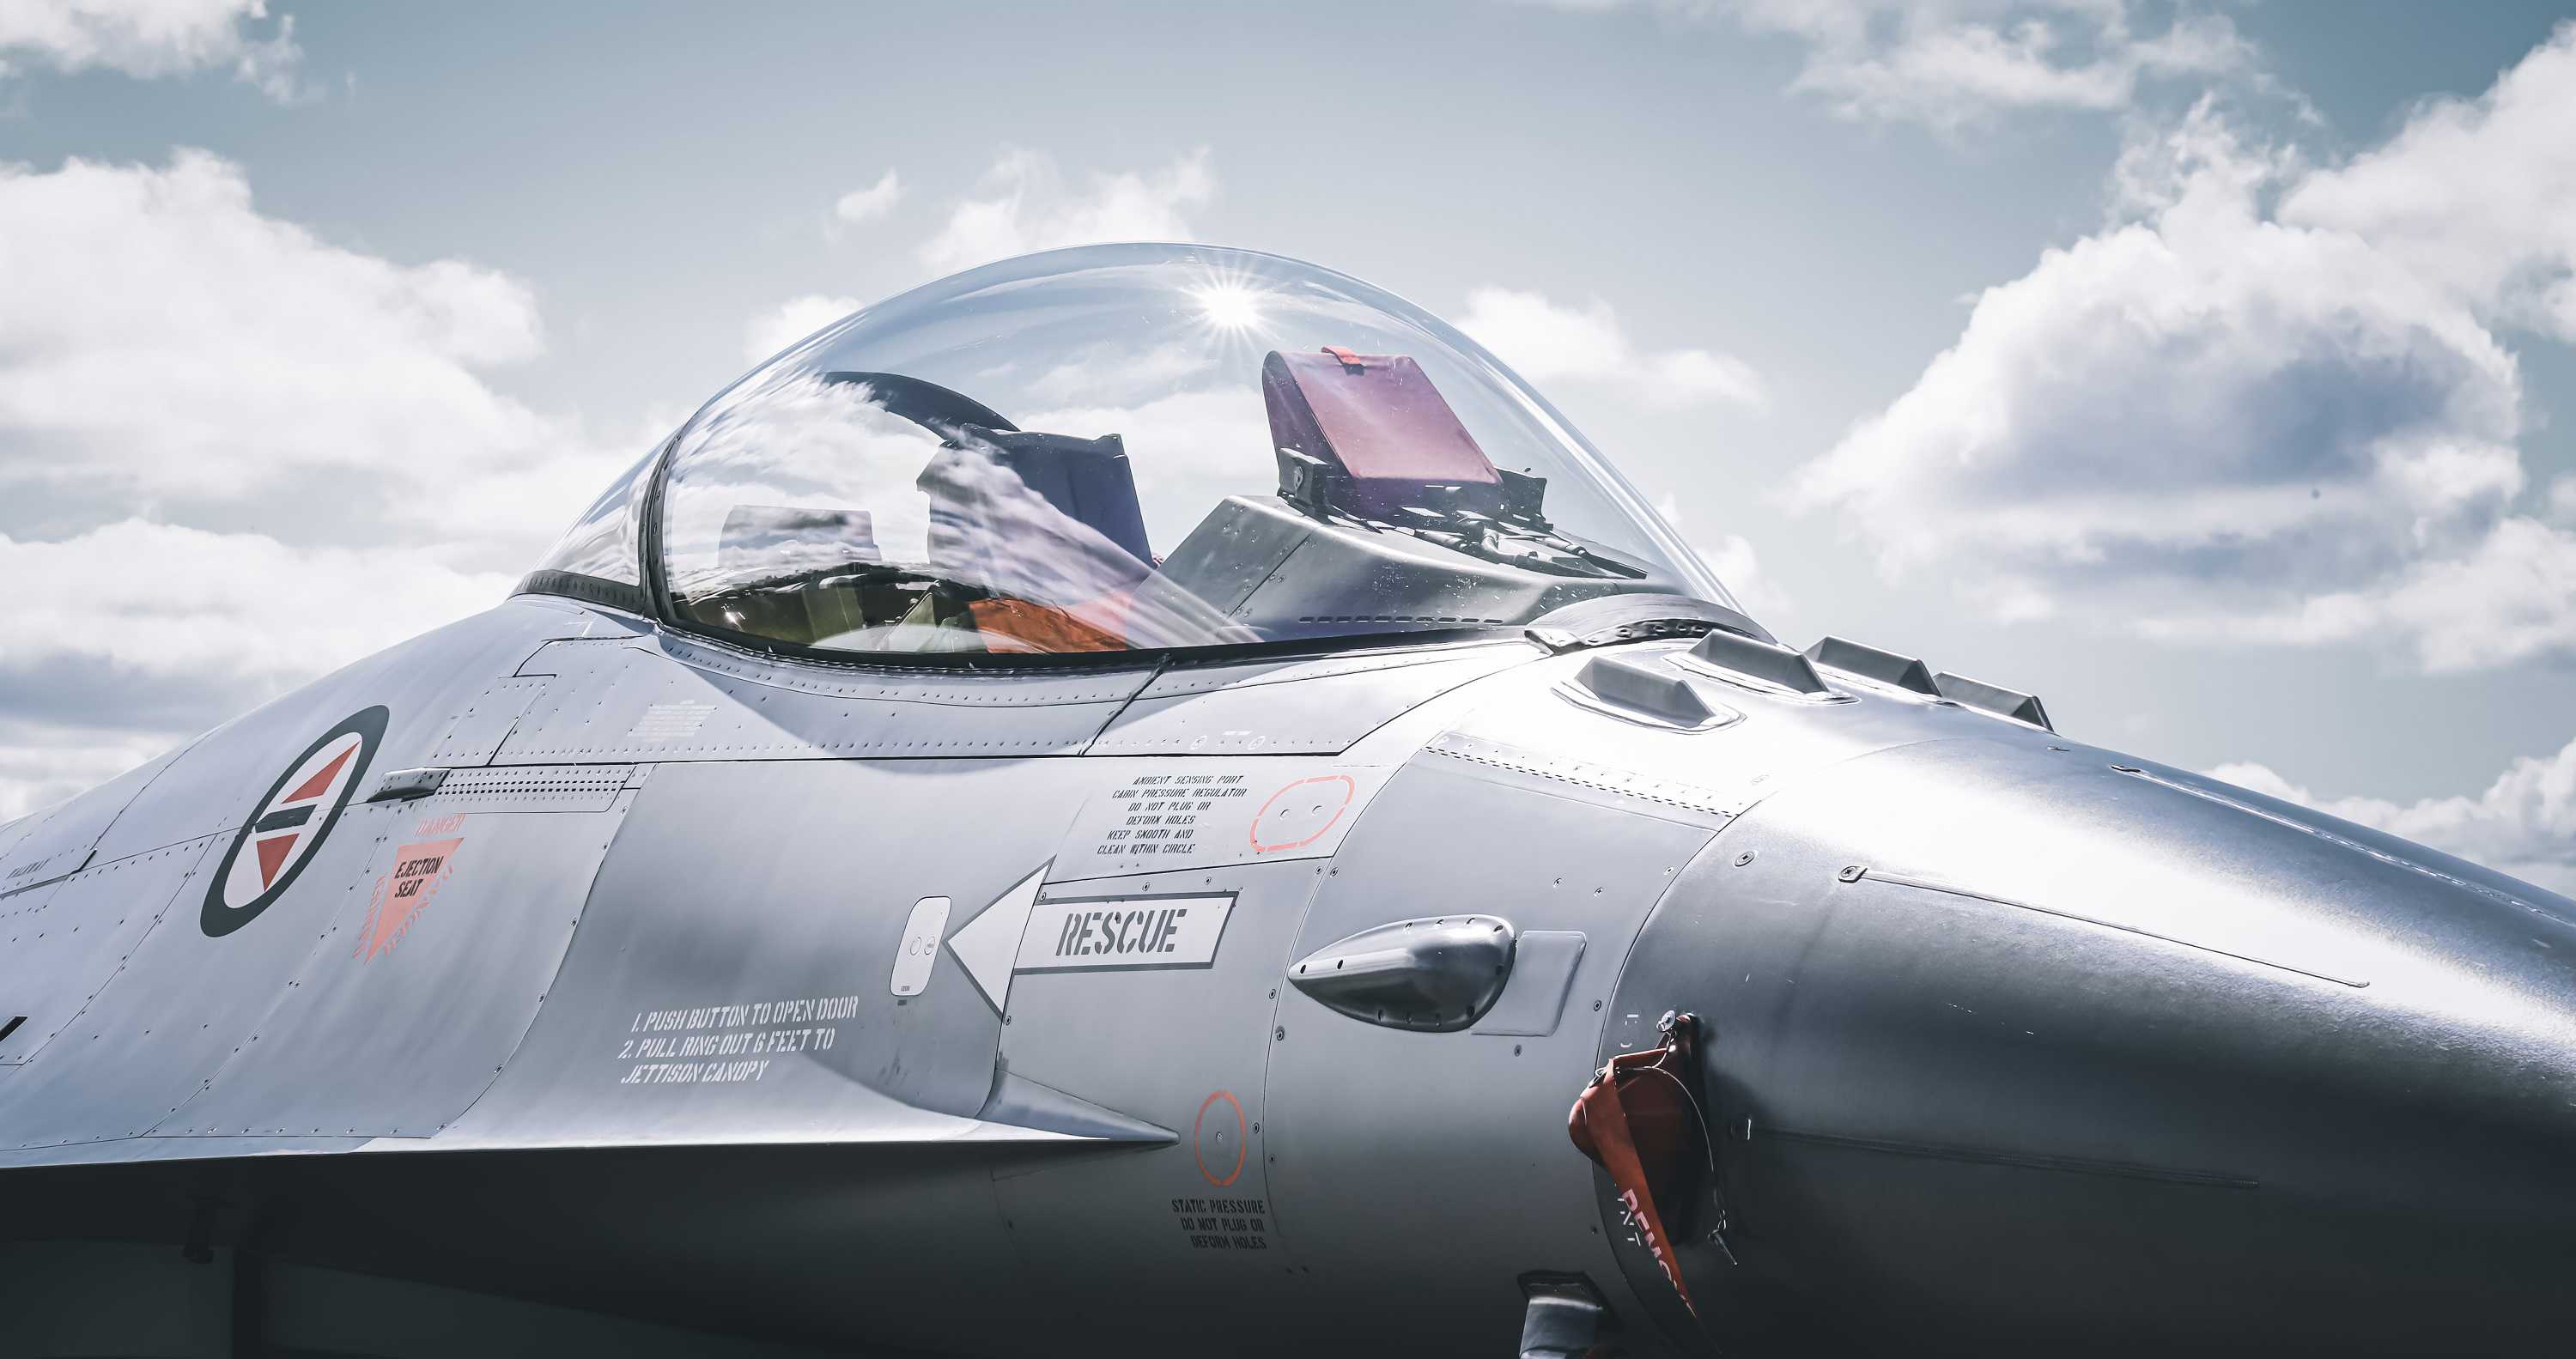 Sideview of F-16 cockpit when aircraft is on ground at Kjeller,  Norway.